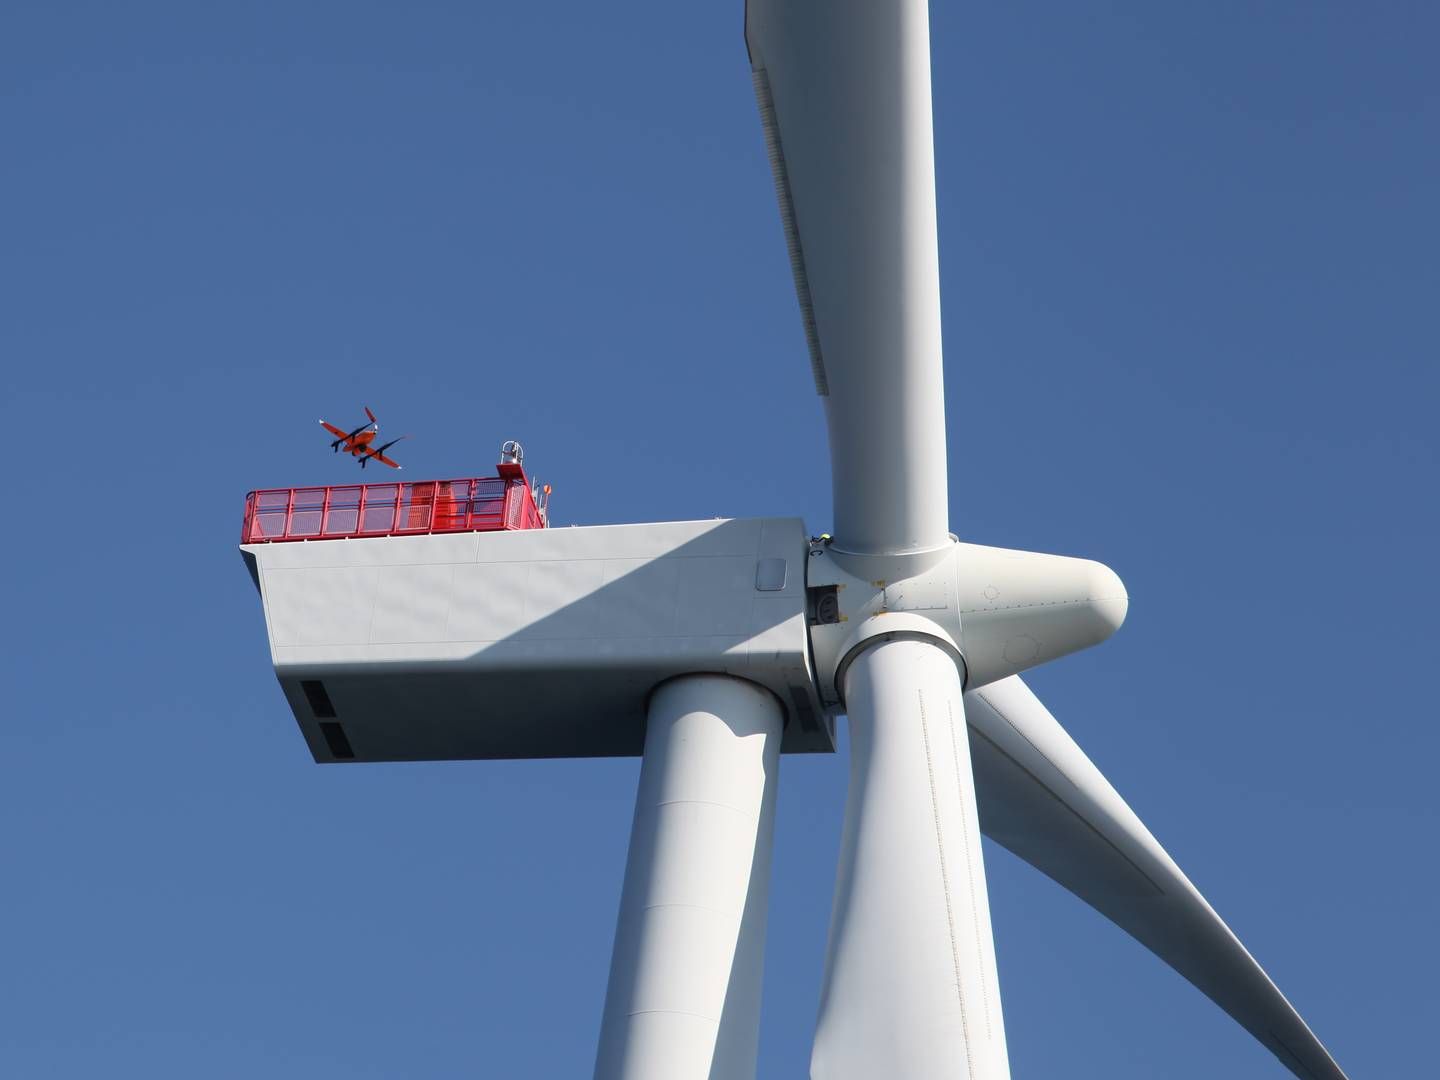 "We are very likely the first in the world to be able to do this," says Peter Matthiesen, Innovation Director at DSV, about servicing offshore wind turbines with drones. | Photo: DSV